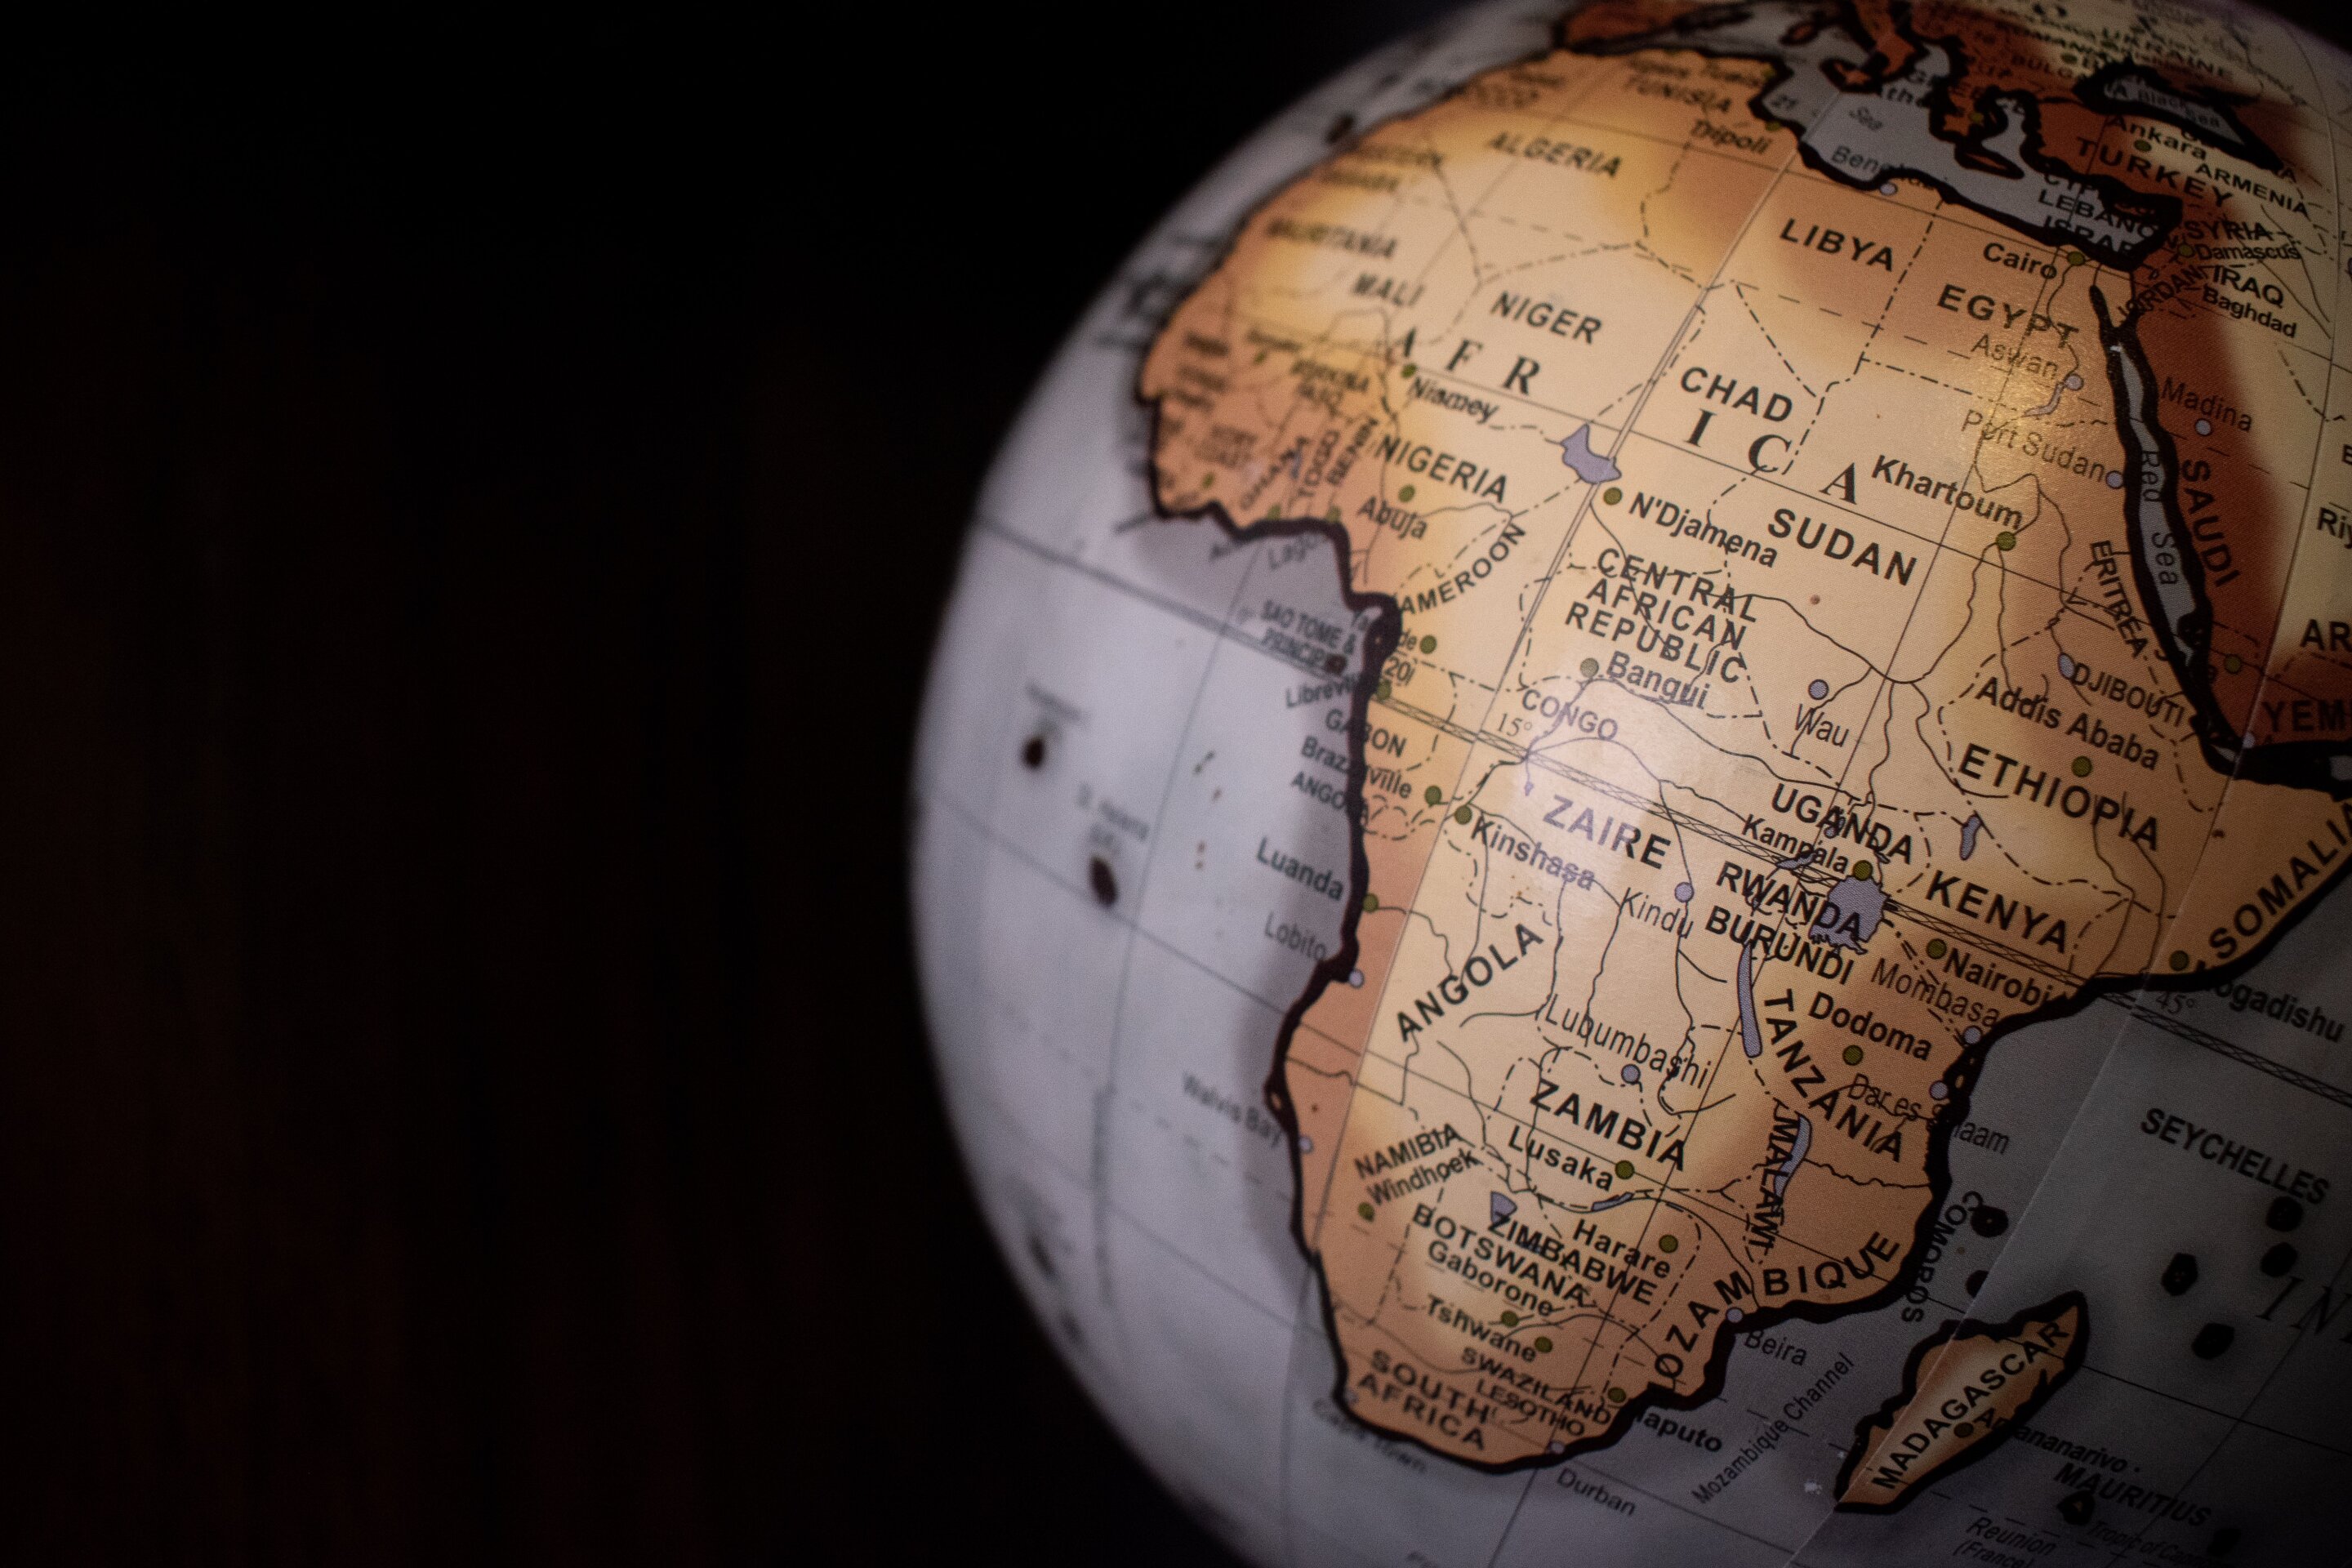 Ancient African empires' impact on migration revealed by genetics